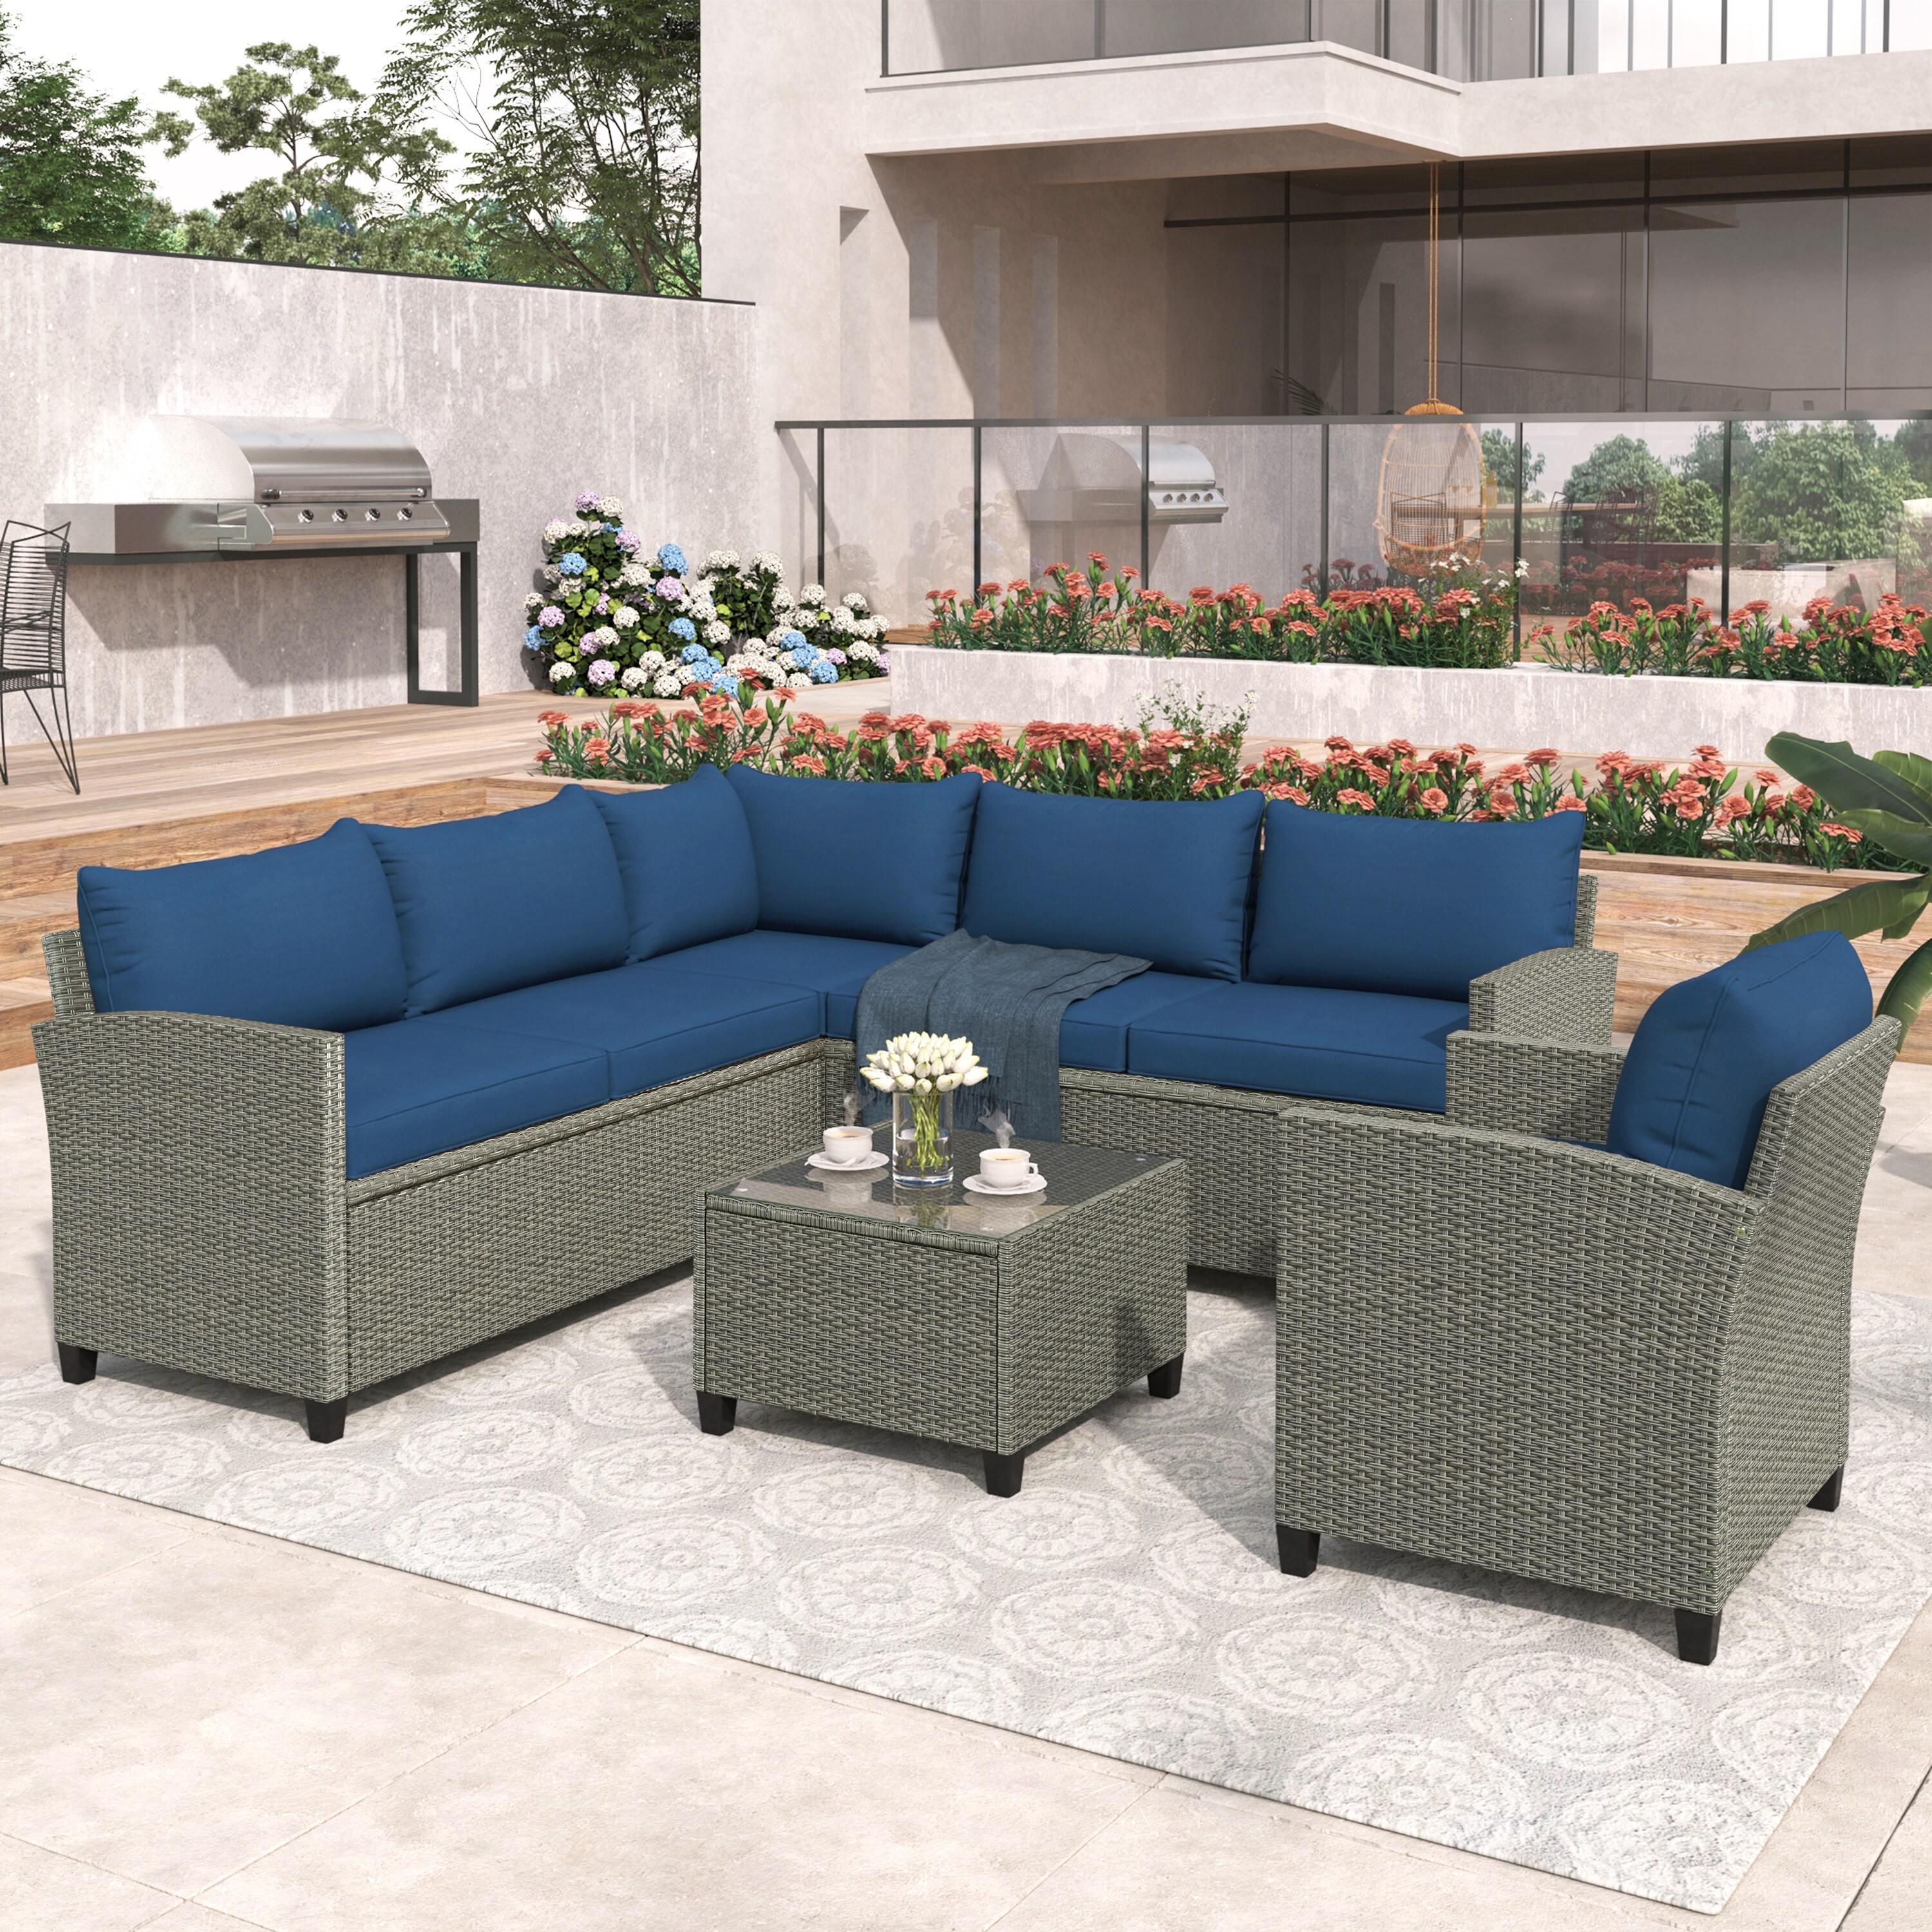 5 Piece Outdoor Conversation Set  Patio Furniture Pe Rattan Sectional Sofa Set With Coffee Table  Cushions And Single Chair